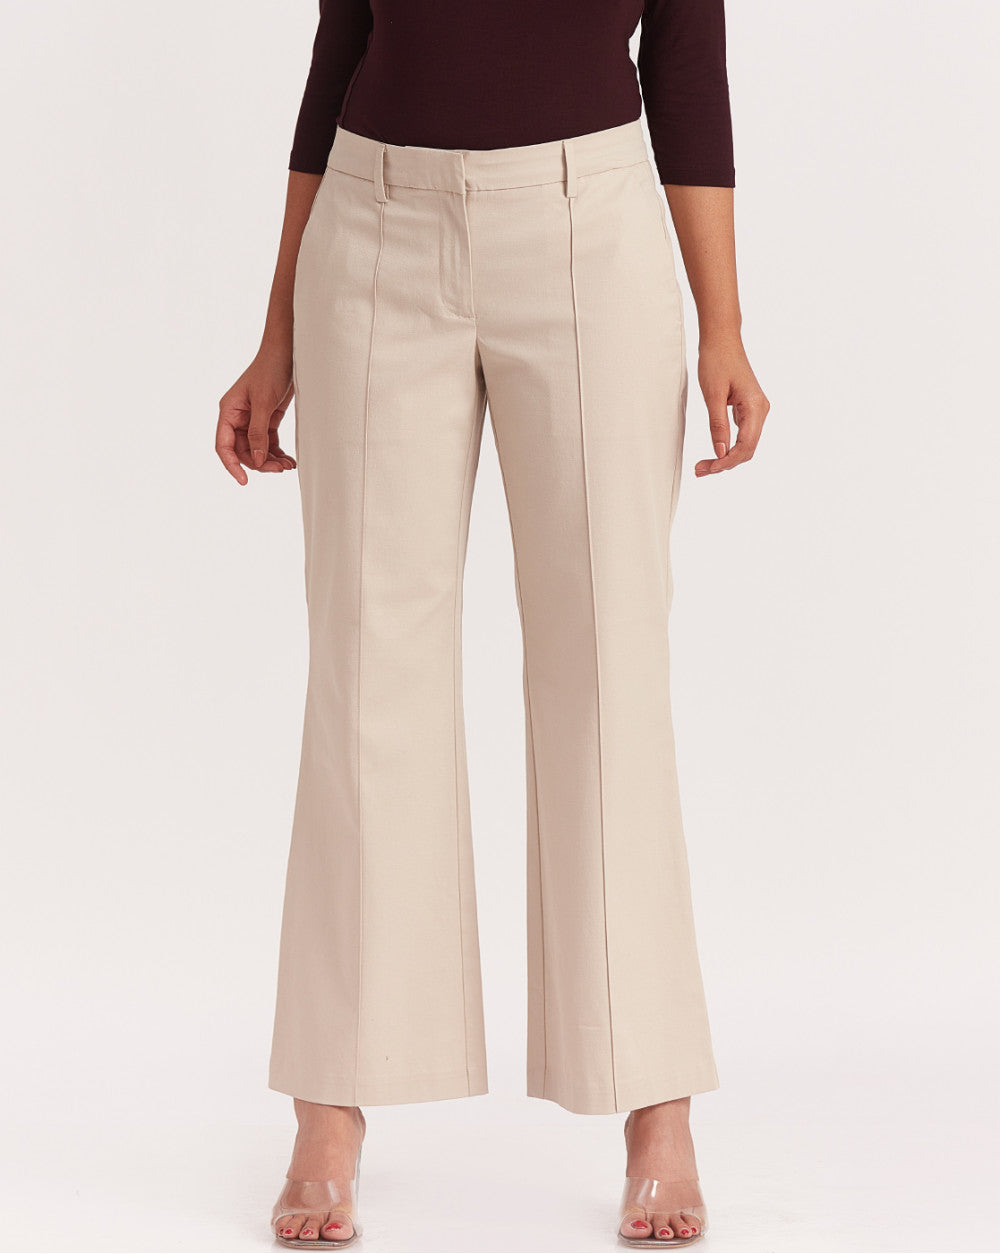 Fit And Flare Flare Mid Waist Smart Pants - Wheat